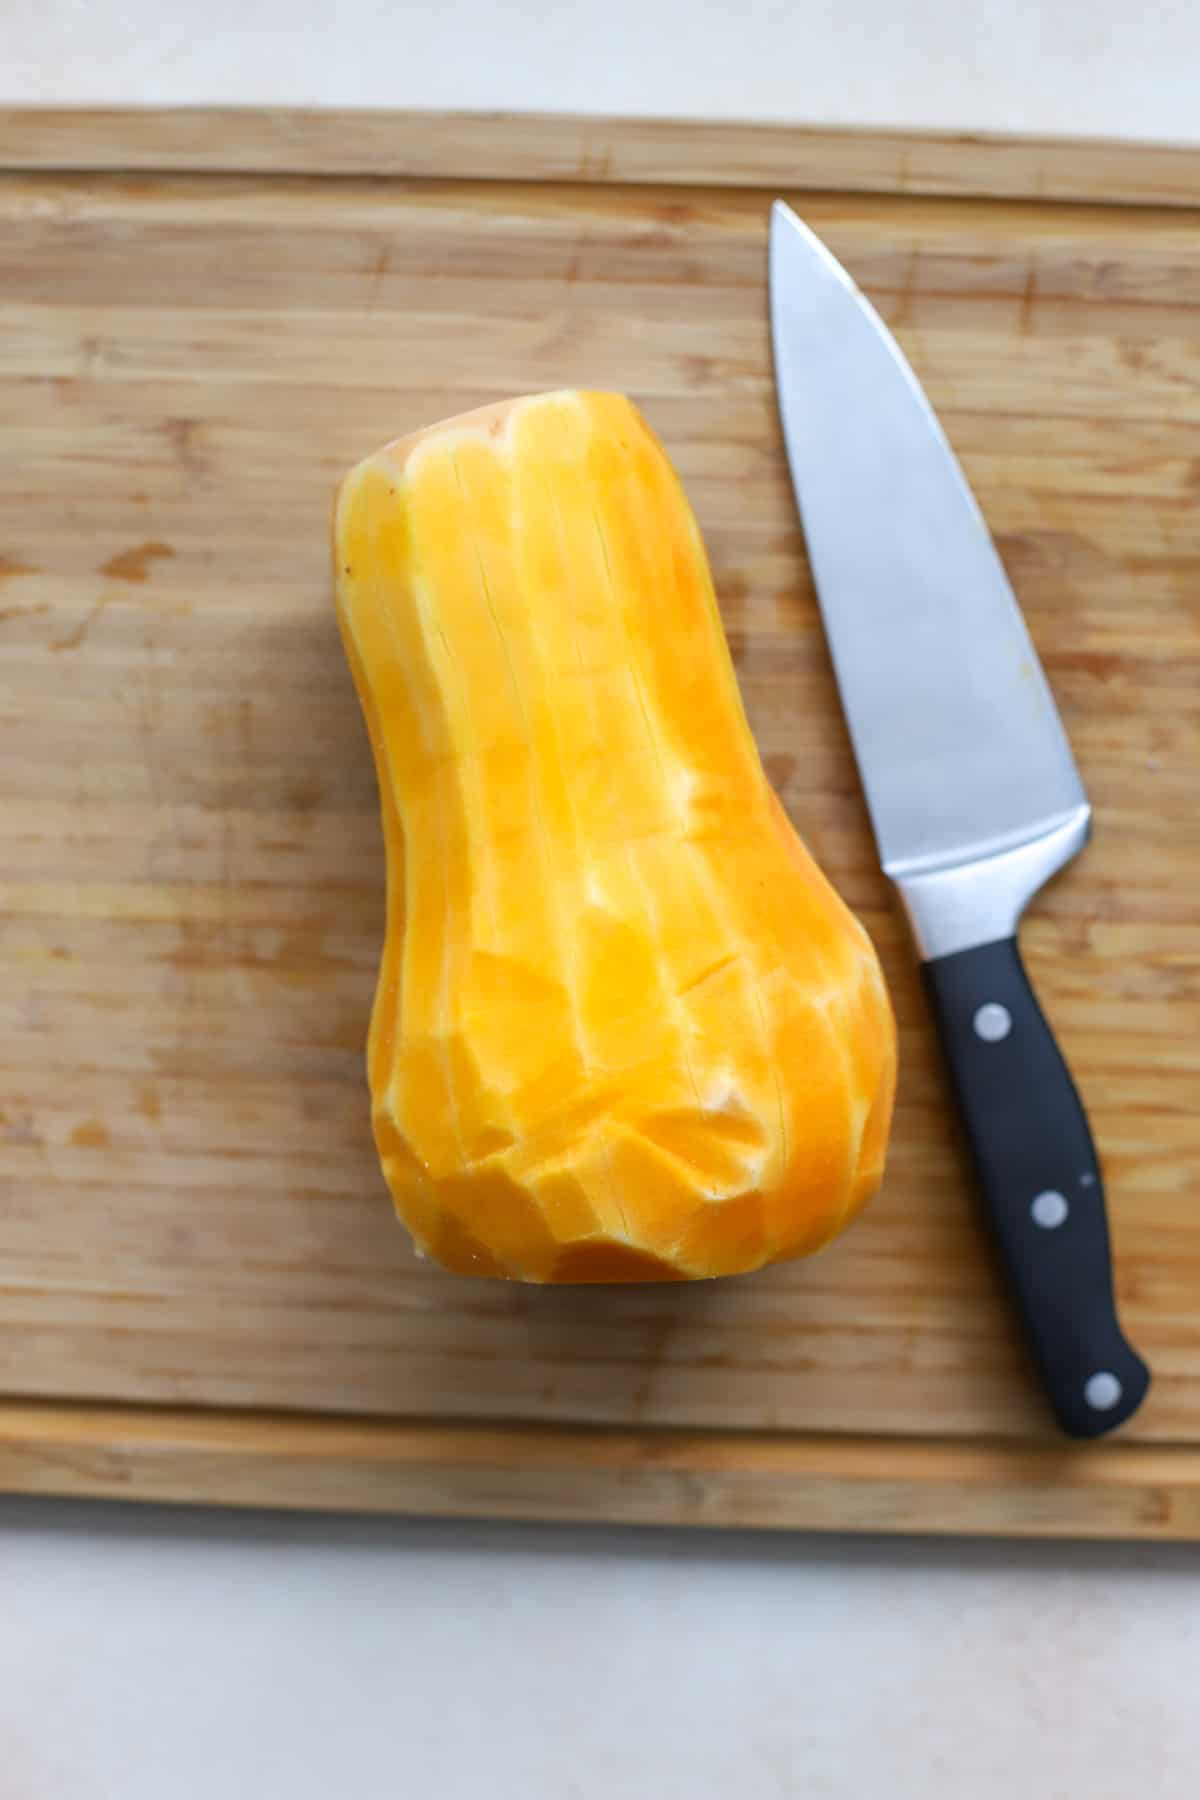 Butternut squash fully peeled, with ends cut off, on cutting board